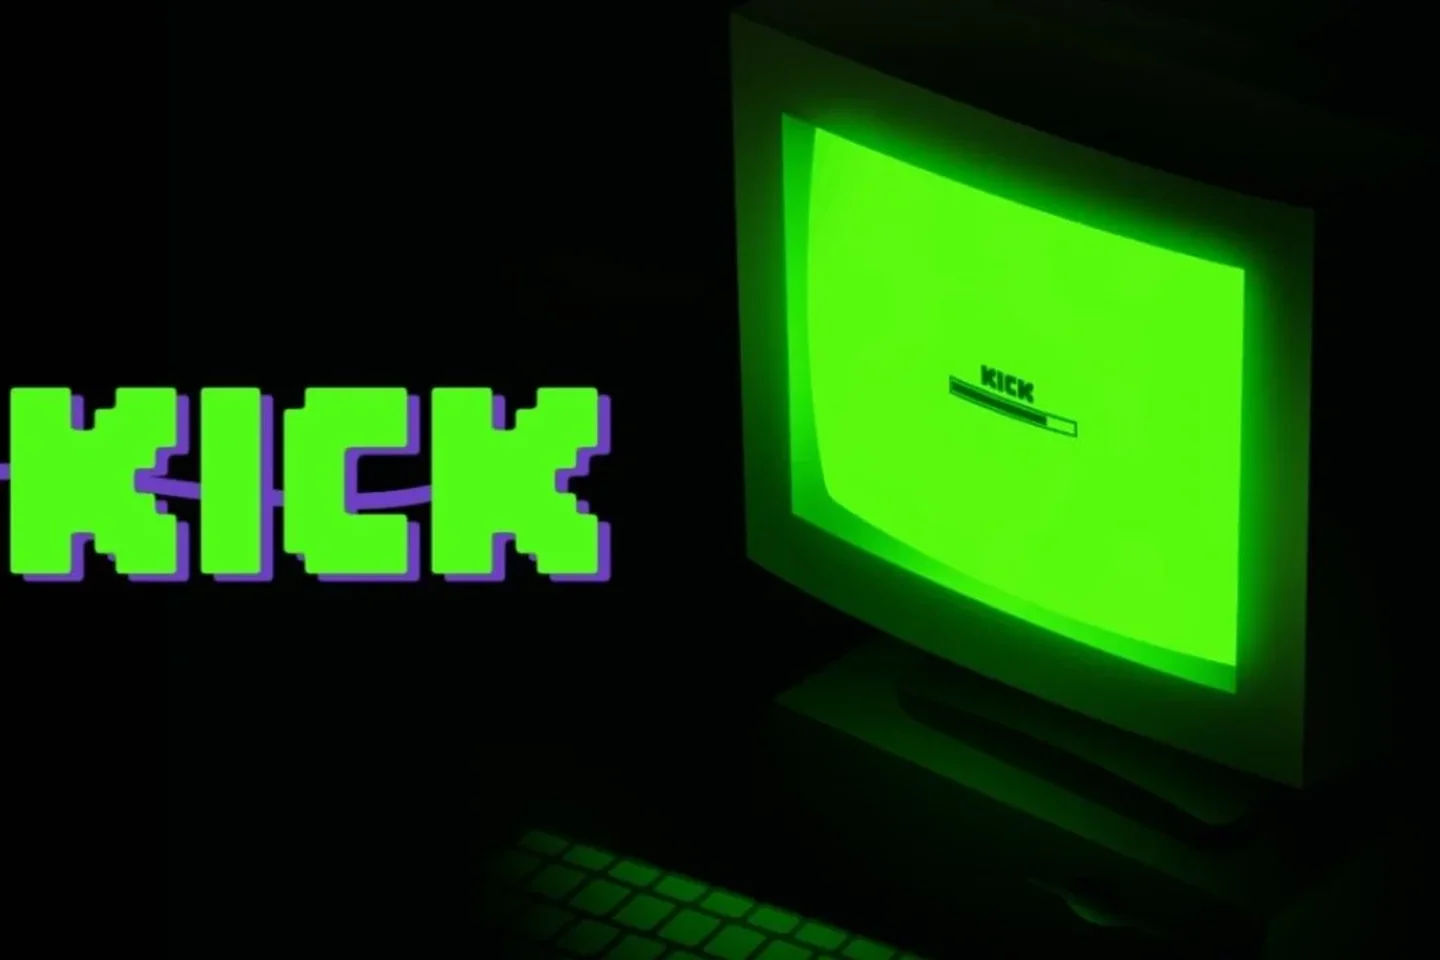 Kick Founder’s Ambitious Vision to Acquire Twitch Amidst Layoffs